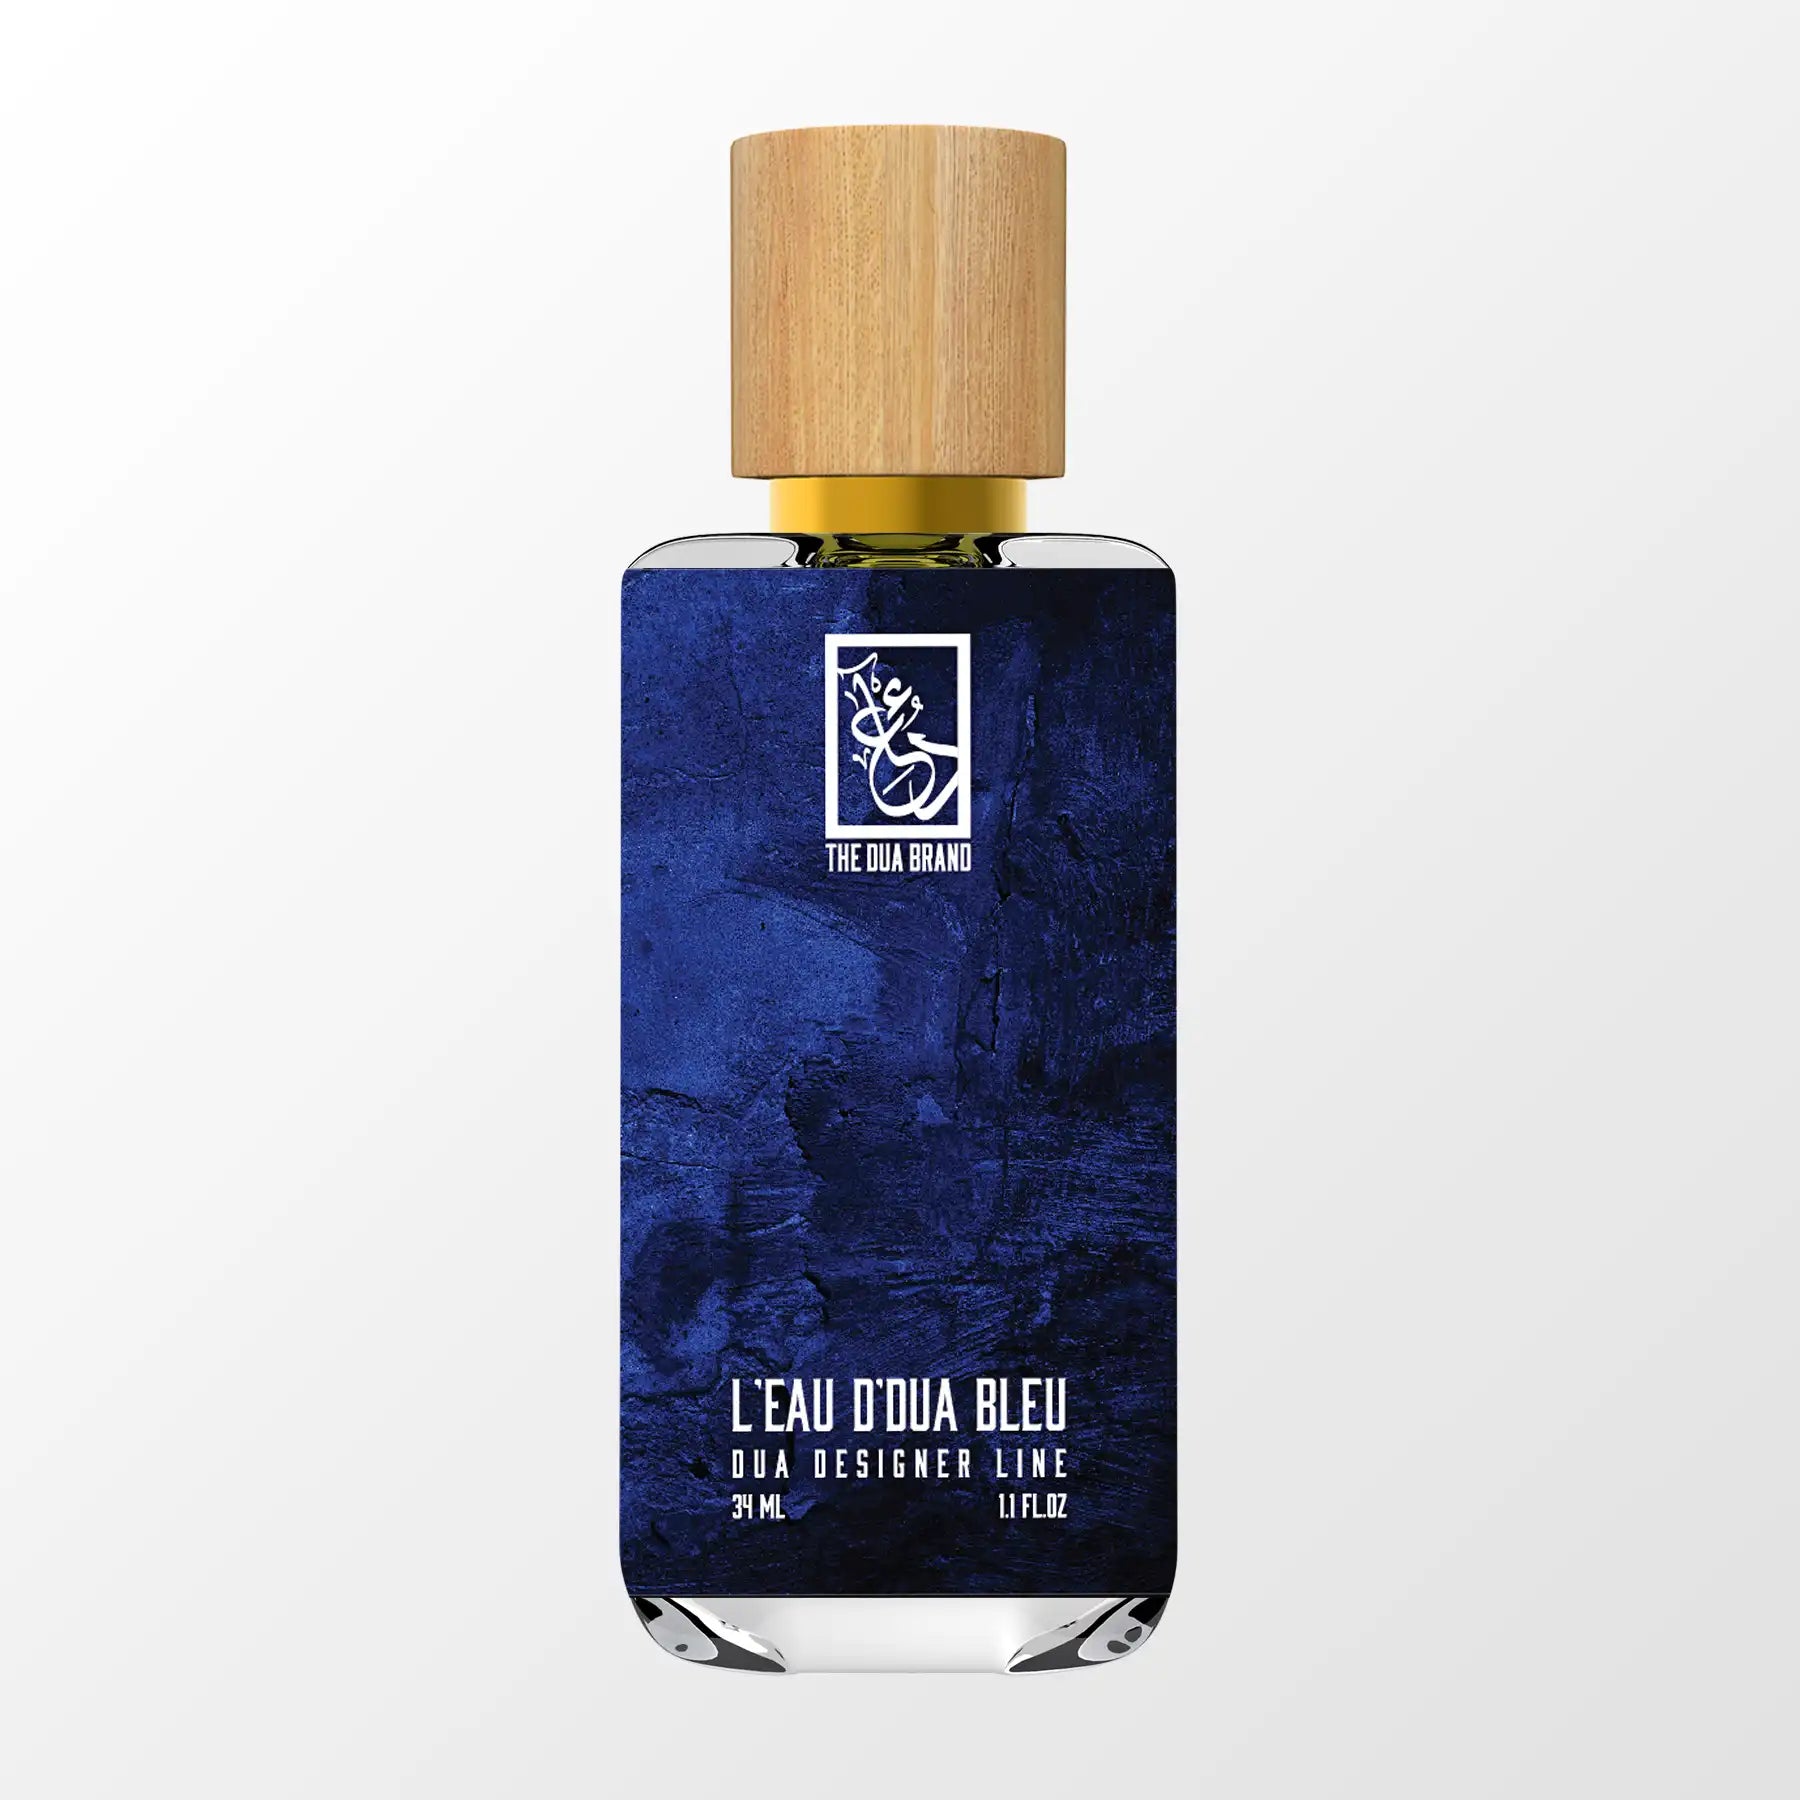 Different Blue: L'Eau Bleue d'Issey Pour Homme Issey Miyake ~ Fragrance  Reviews